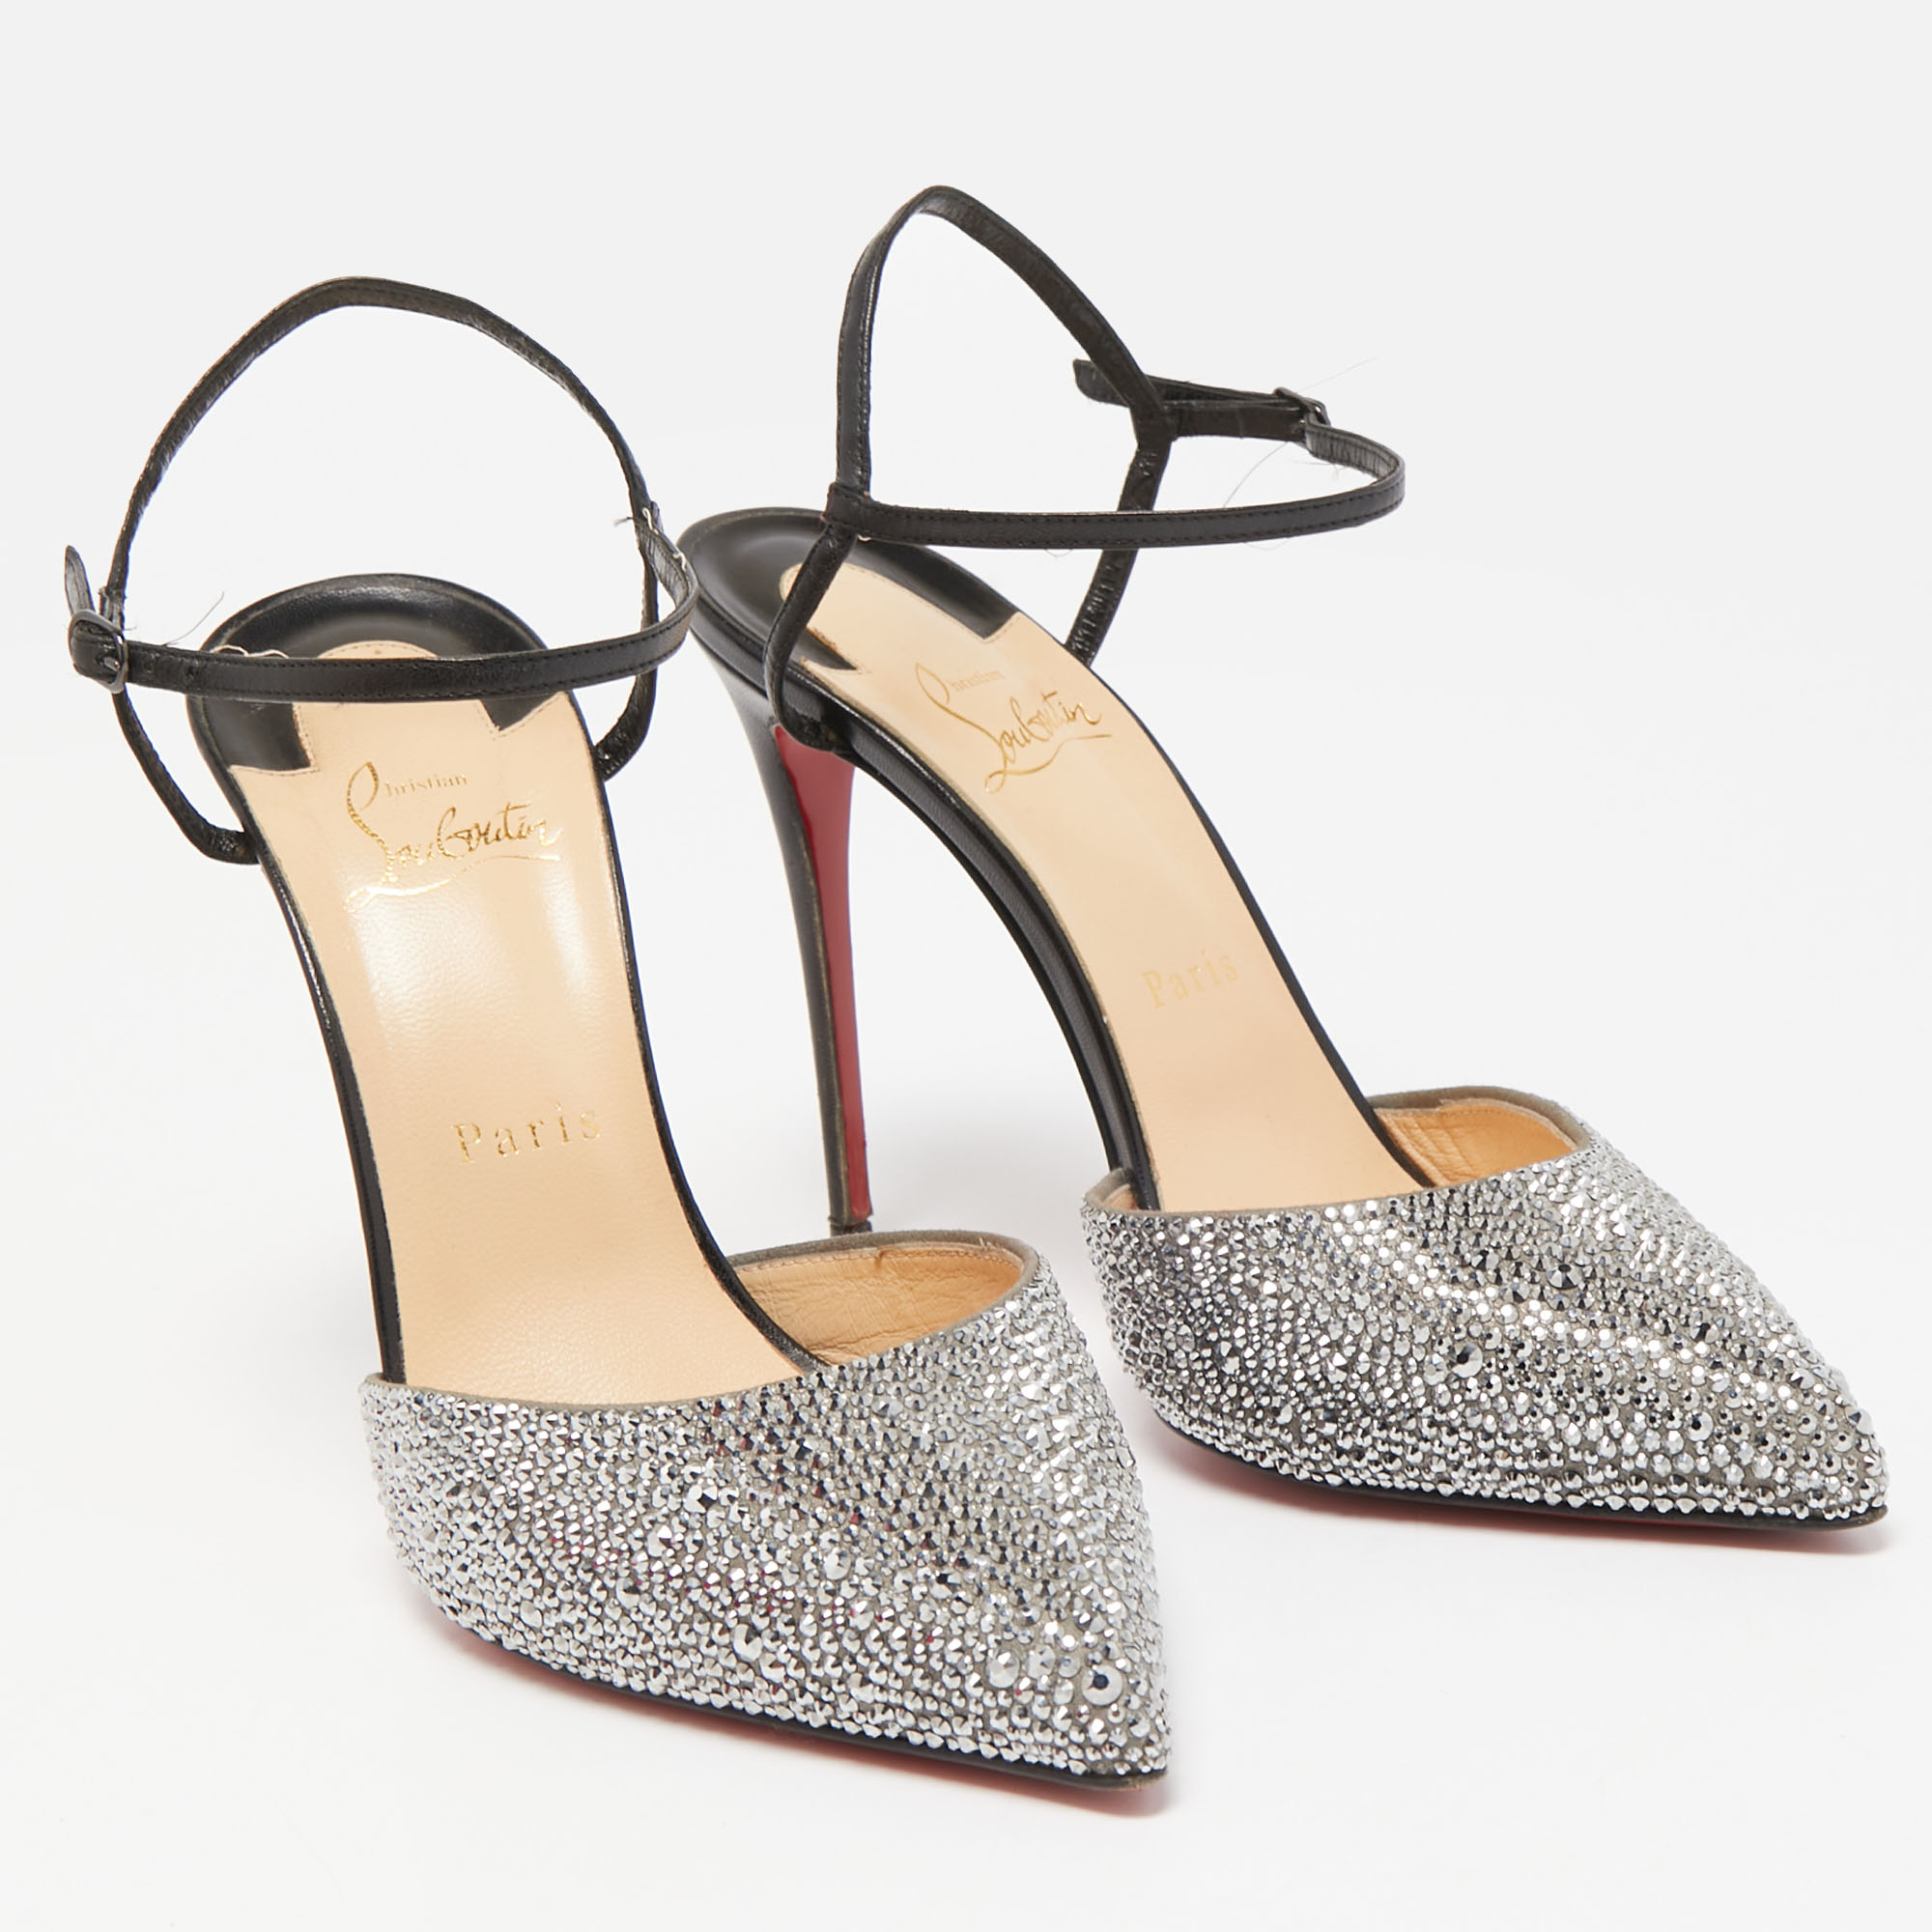 Christian Louboutin Grey/Black Suede And Leather Rivierina Strass Pumps Size 39